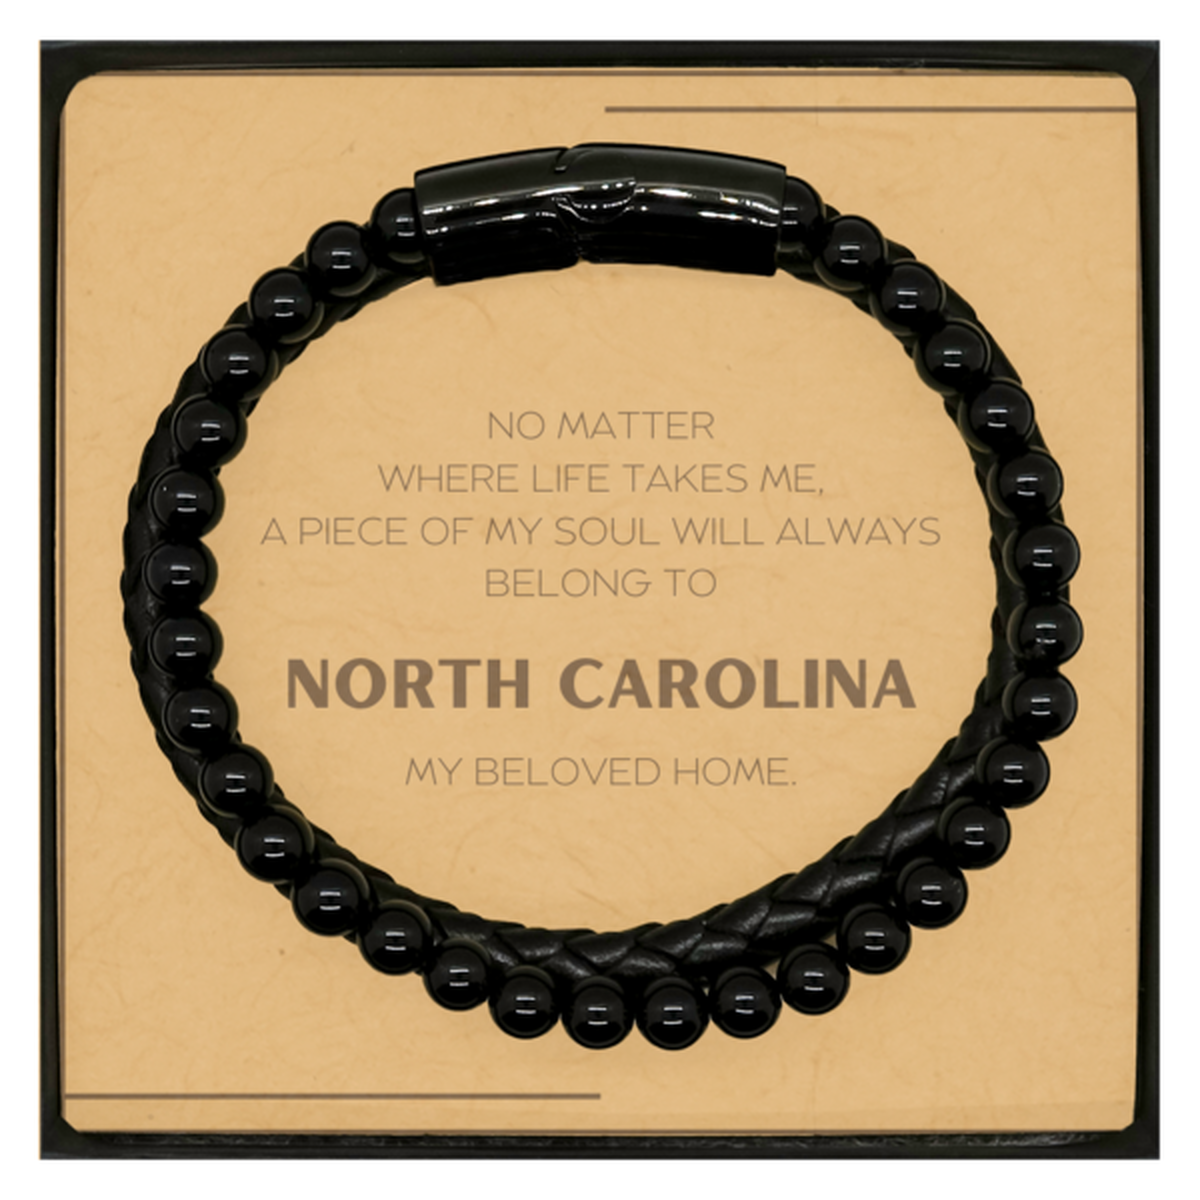 Love North Carolina State Gifts, My soul will always belong to North Carolina, Proud Stone Leather Bracelets, Birthday Christmas Unique Gifts For North Carolina Men, Women, Friends